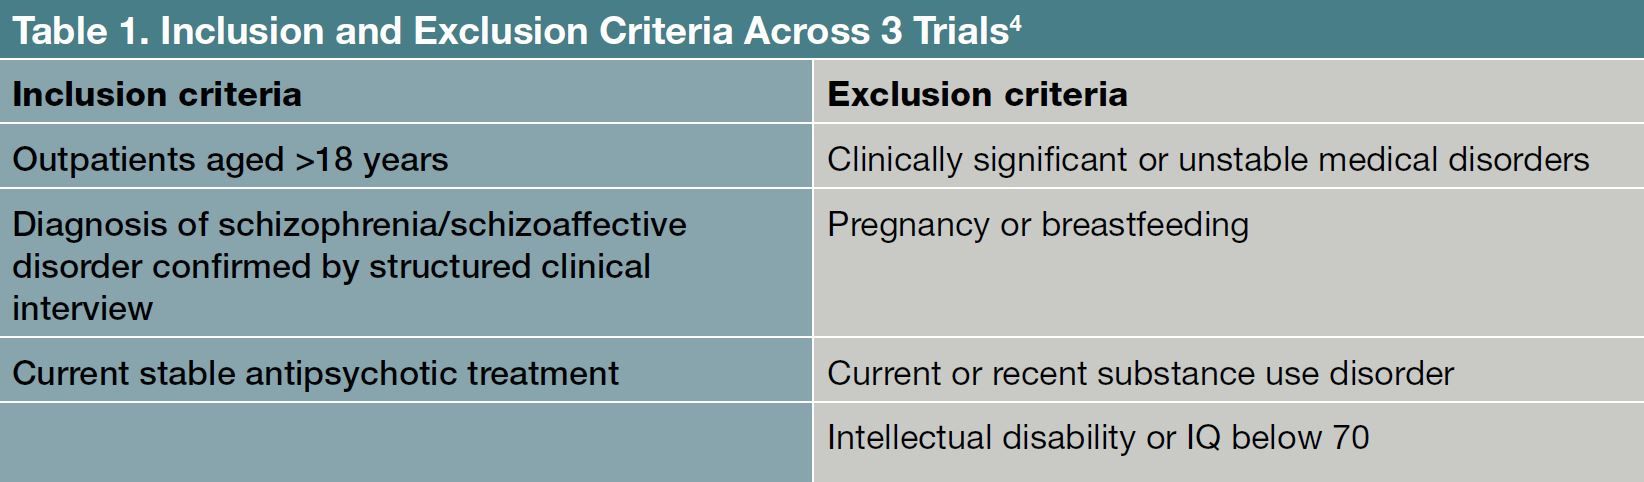 Table 1. Inclusion and Exclusion Criteria Across 3 Trials4